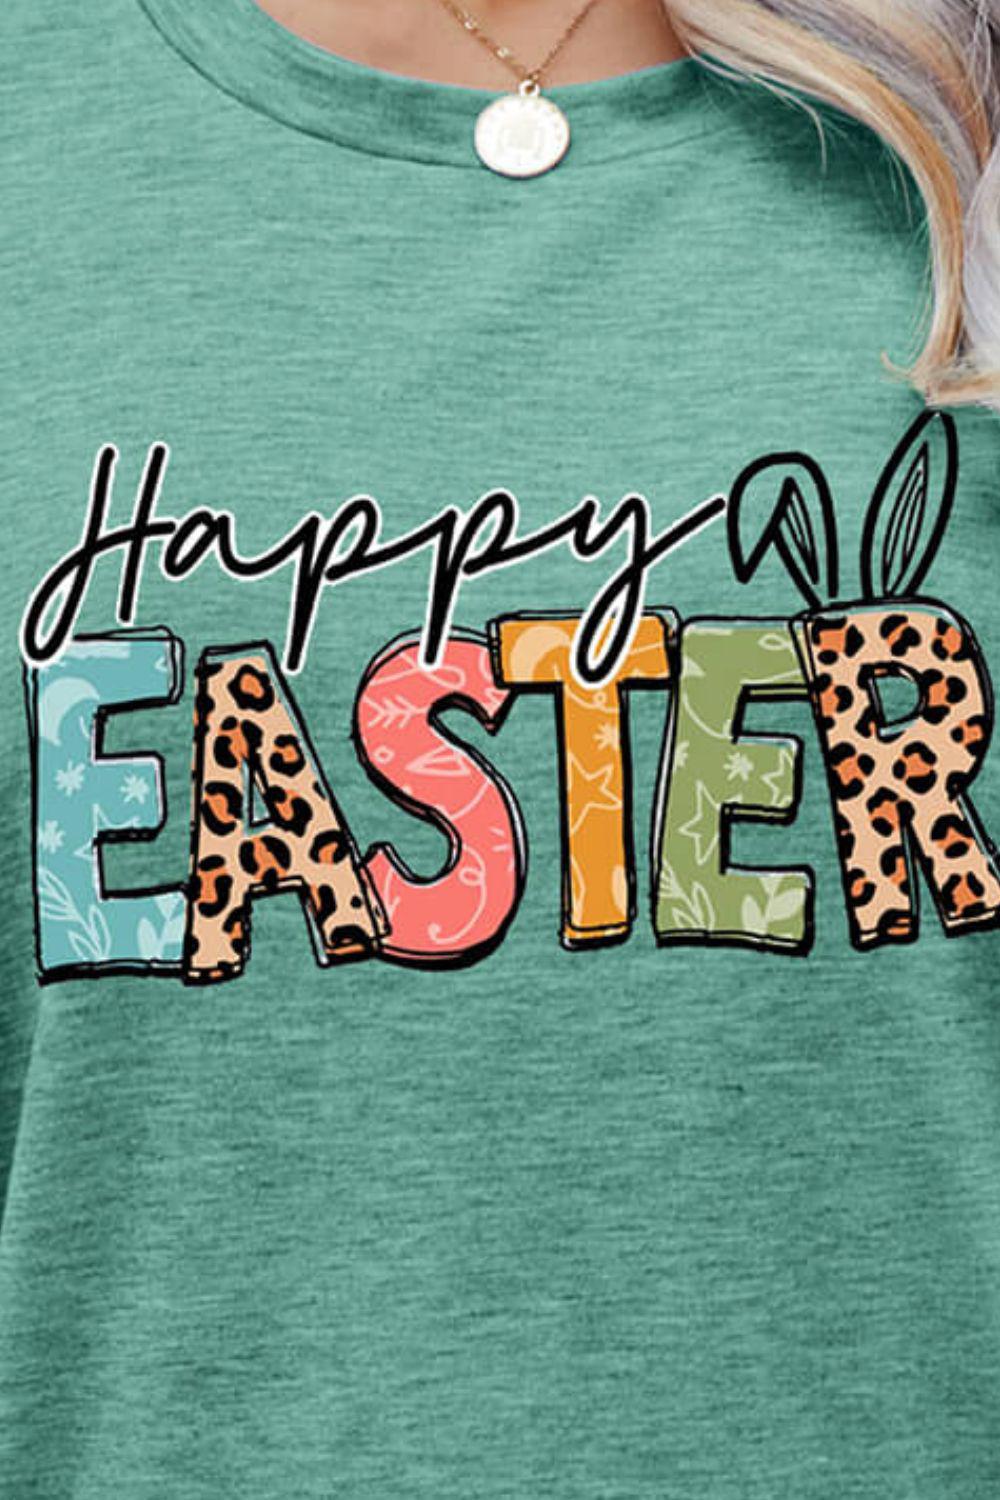 HAPPY EASTER Graphic Round Neck Tee Shirt BLUE ZONE PLANET